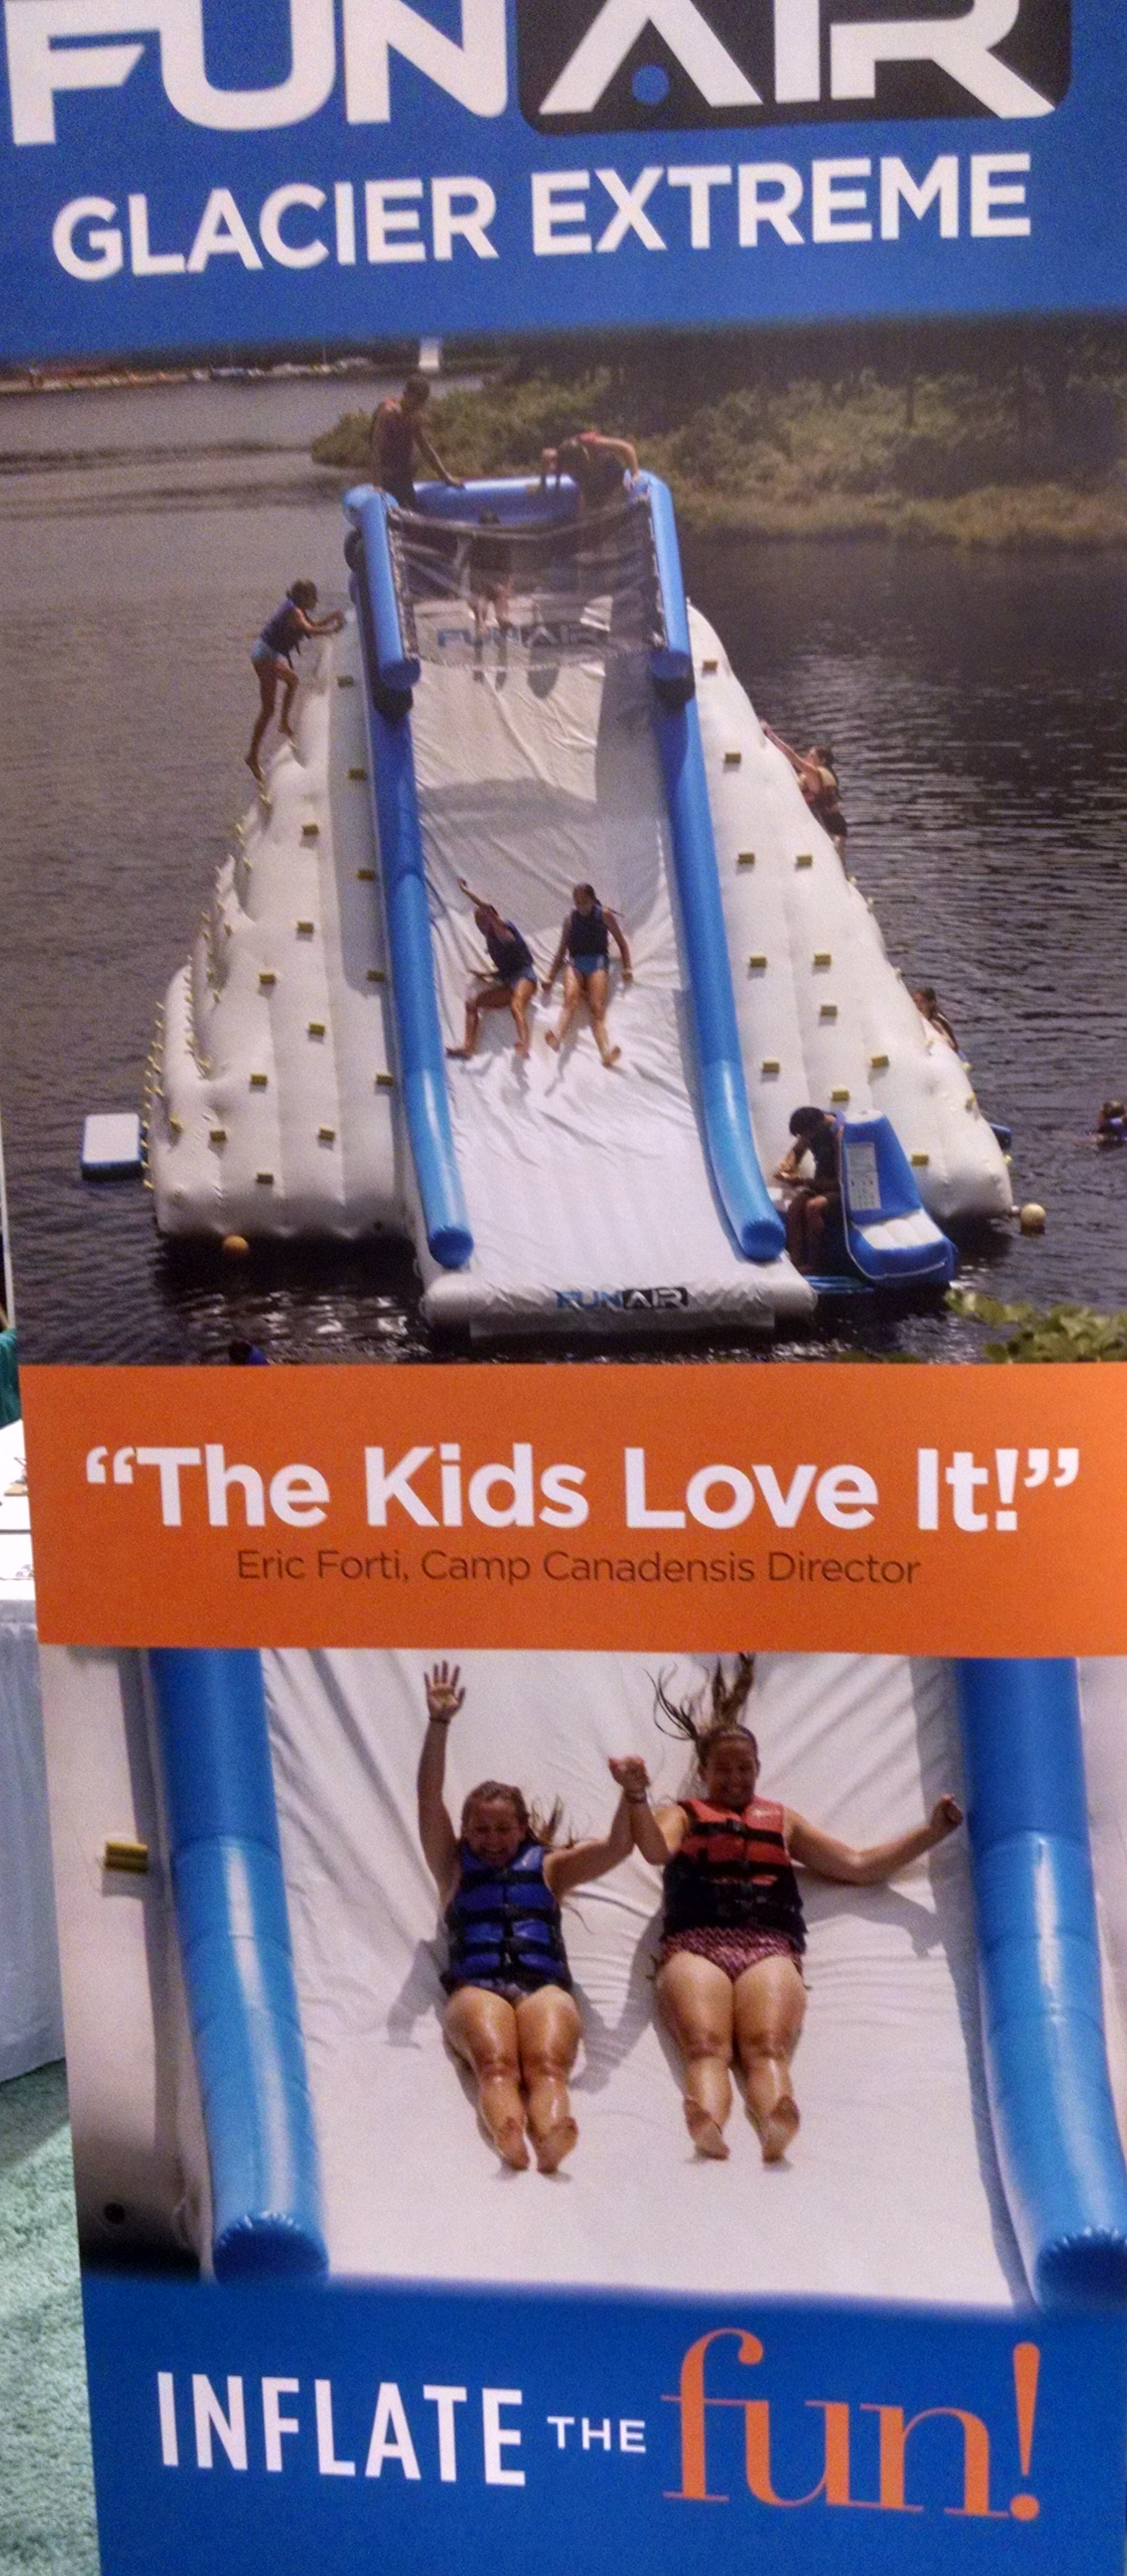 While in the vendor hall at the camp conference, we saw this ad, featuring camp's Ice Mountain and a quote from Director Eric Forti!